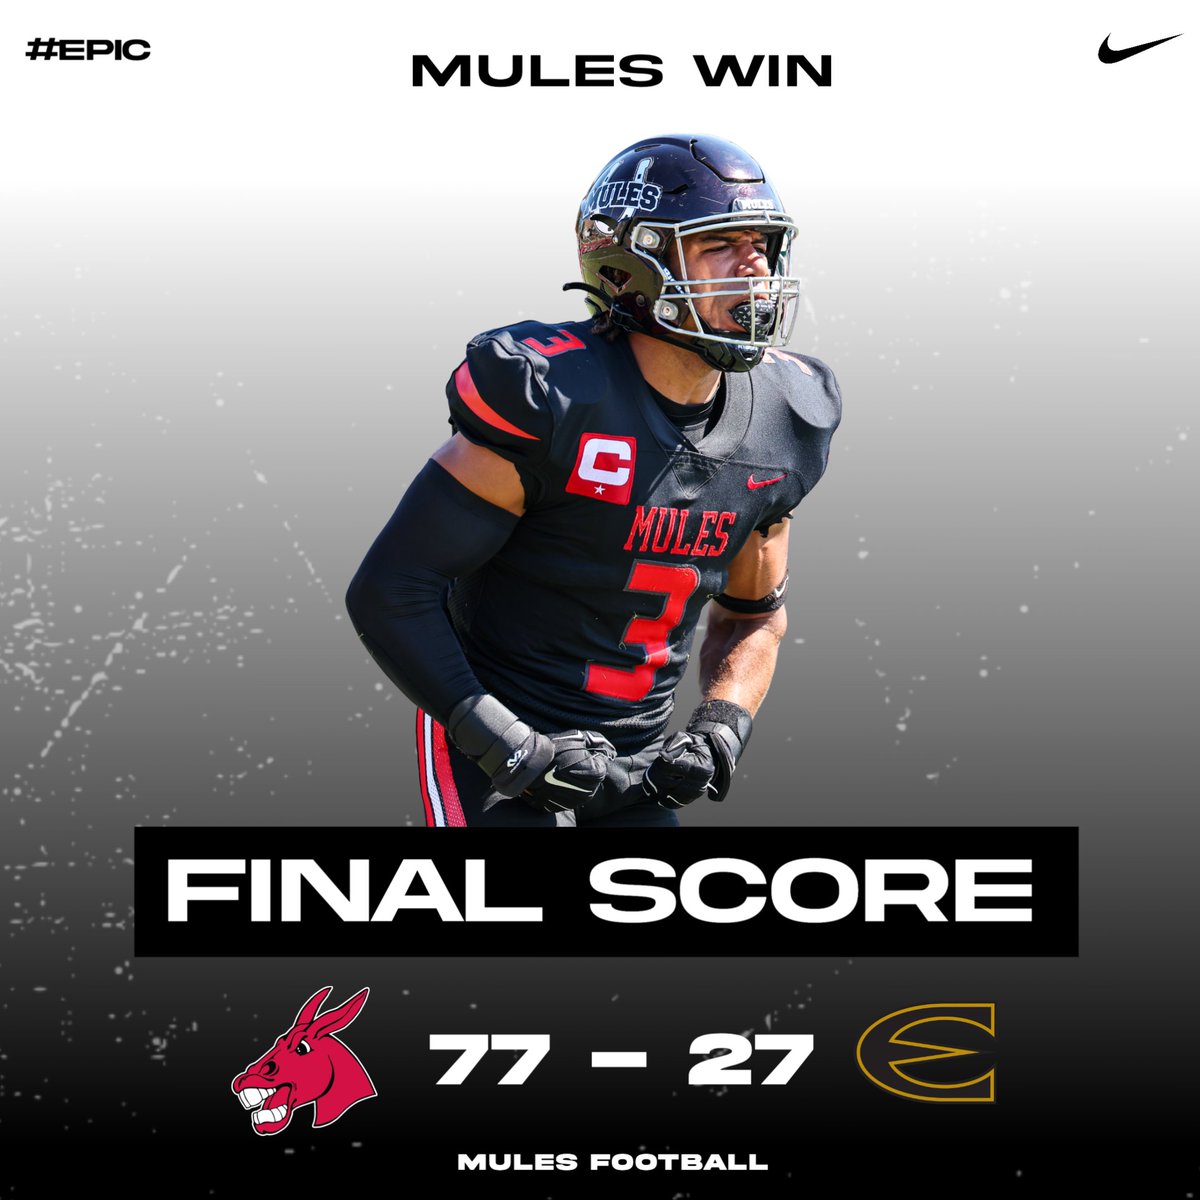 Homecoming Win! #teamUCM X #EPIC